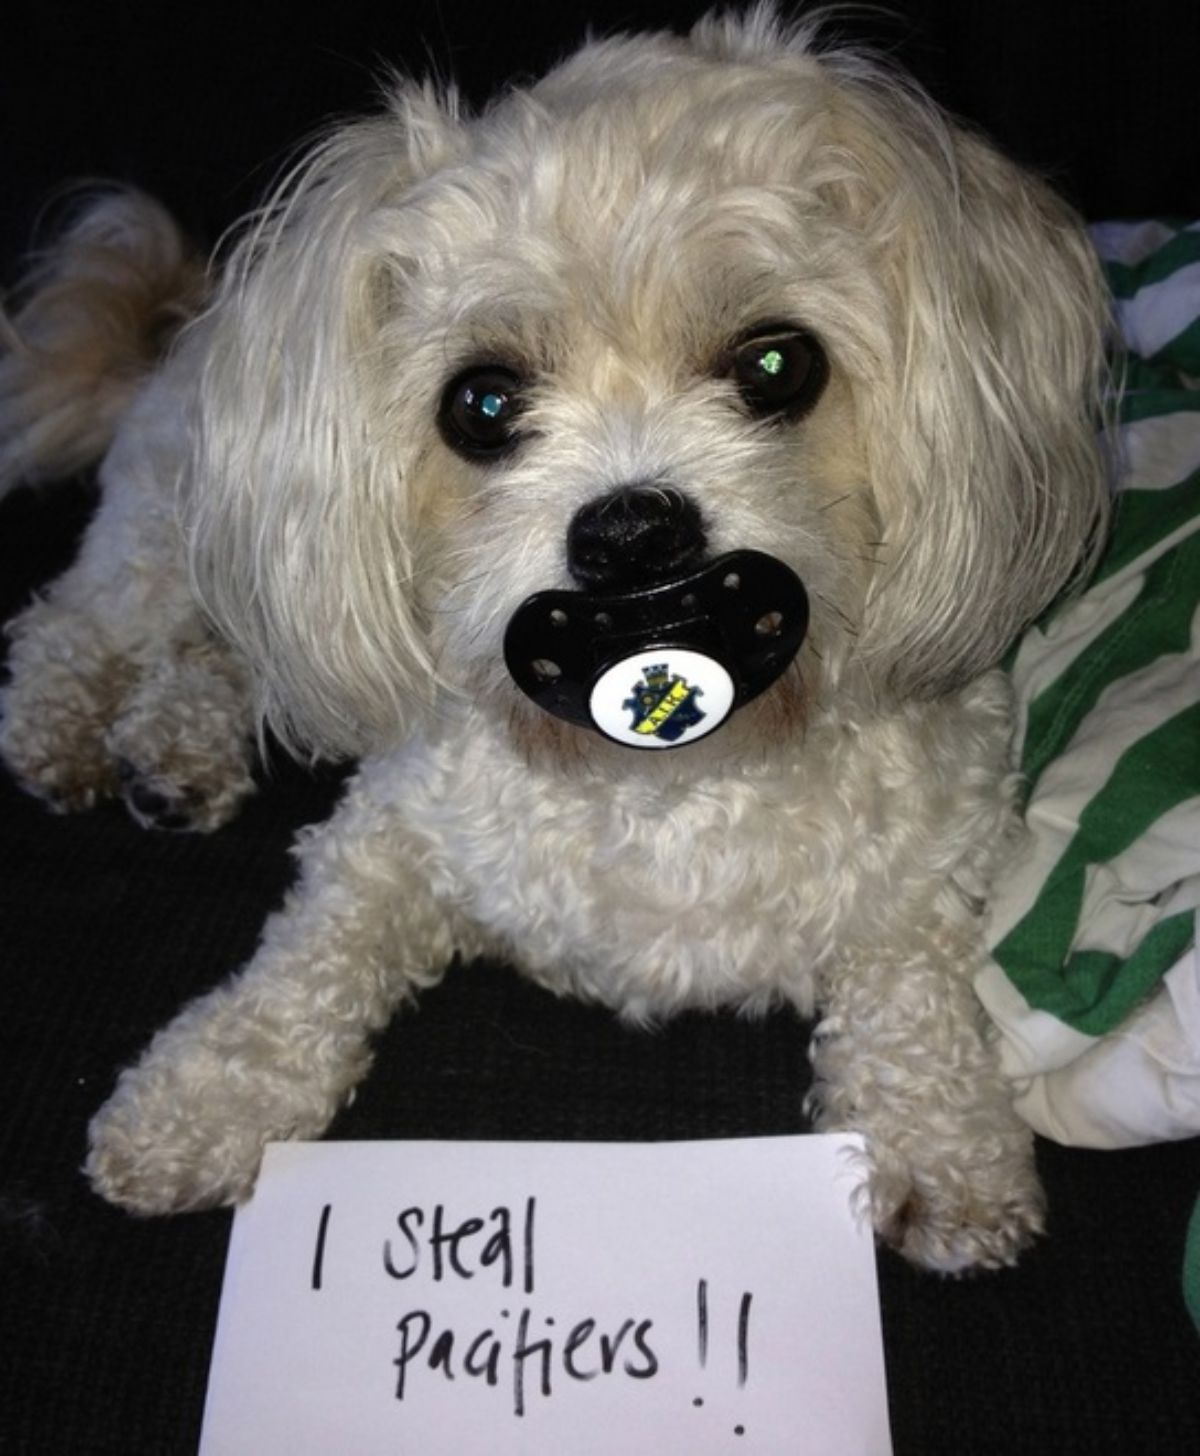 fluffy white dog with a black pacifier in its mouth with a note saying "I steal pacifiers!!"